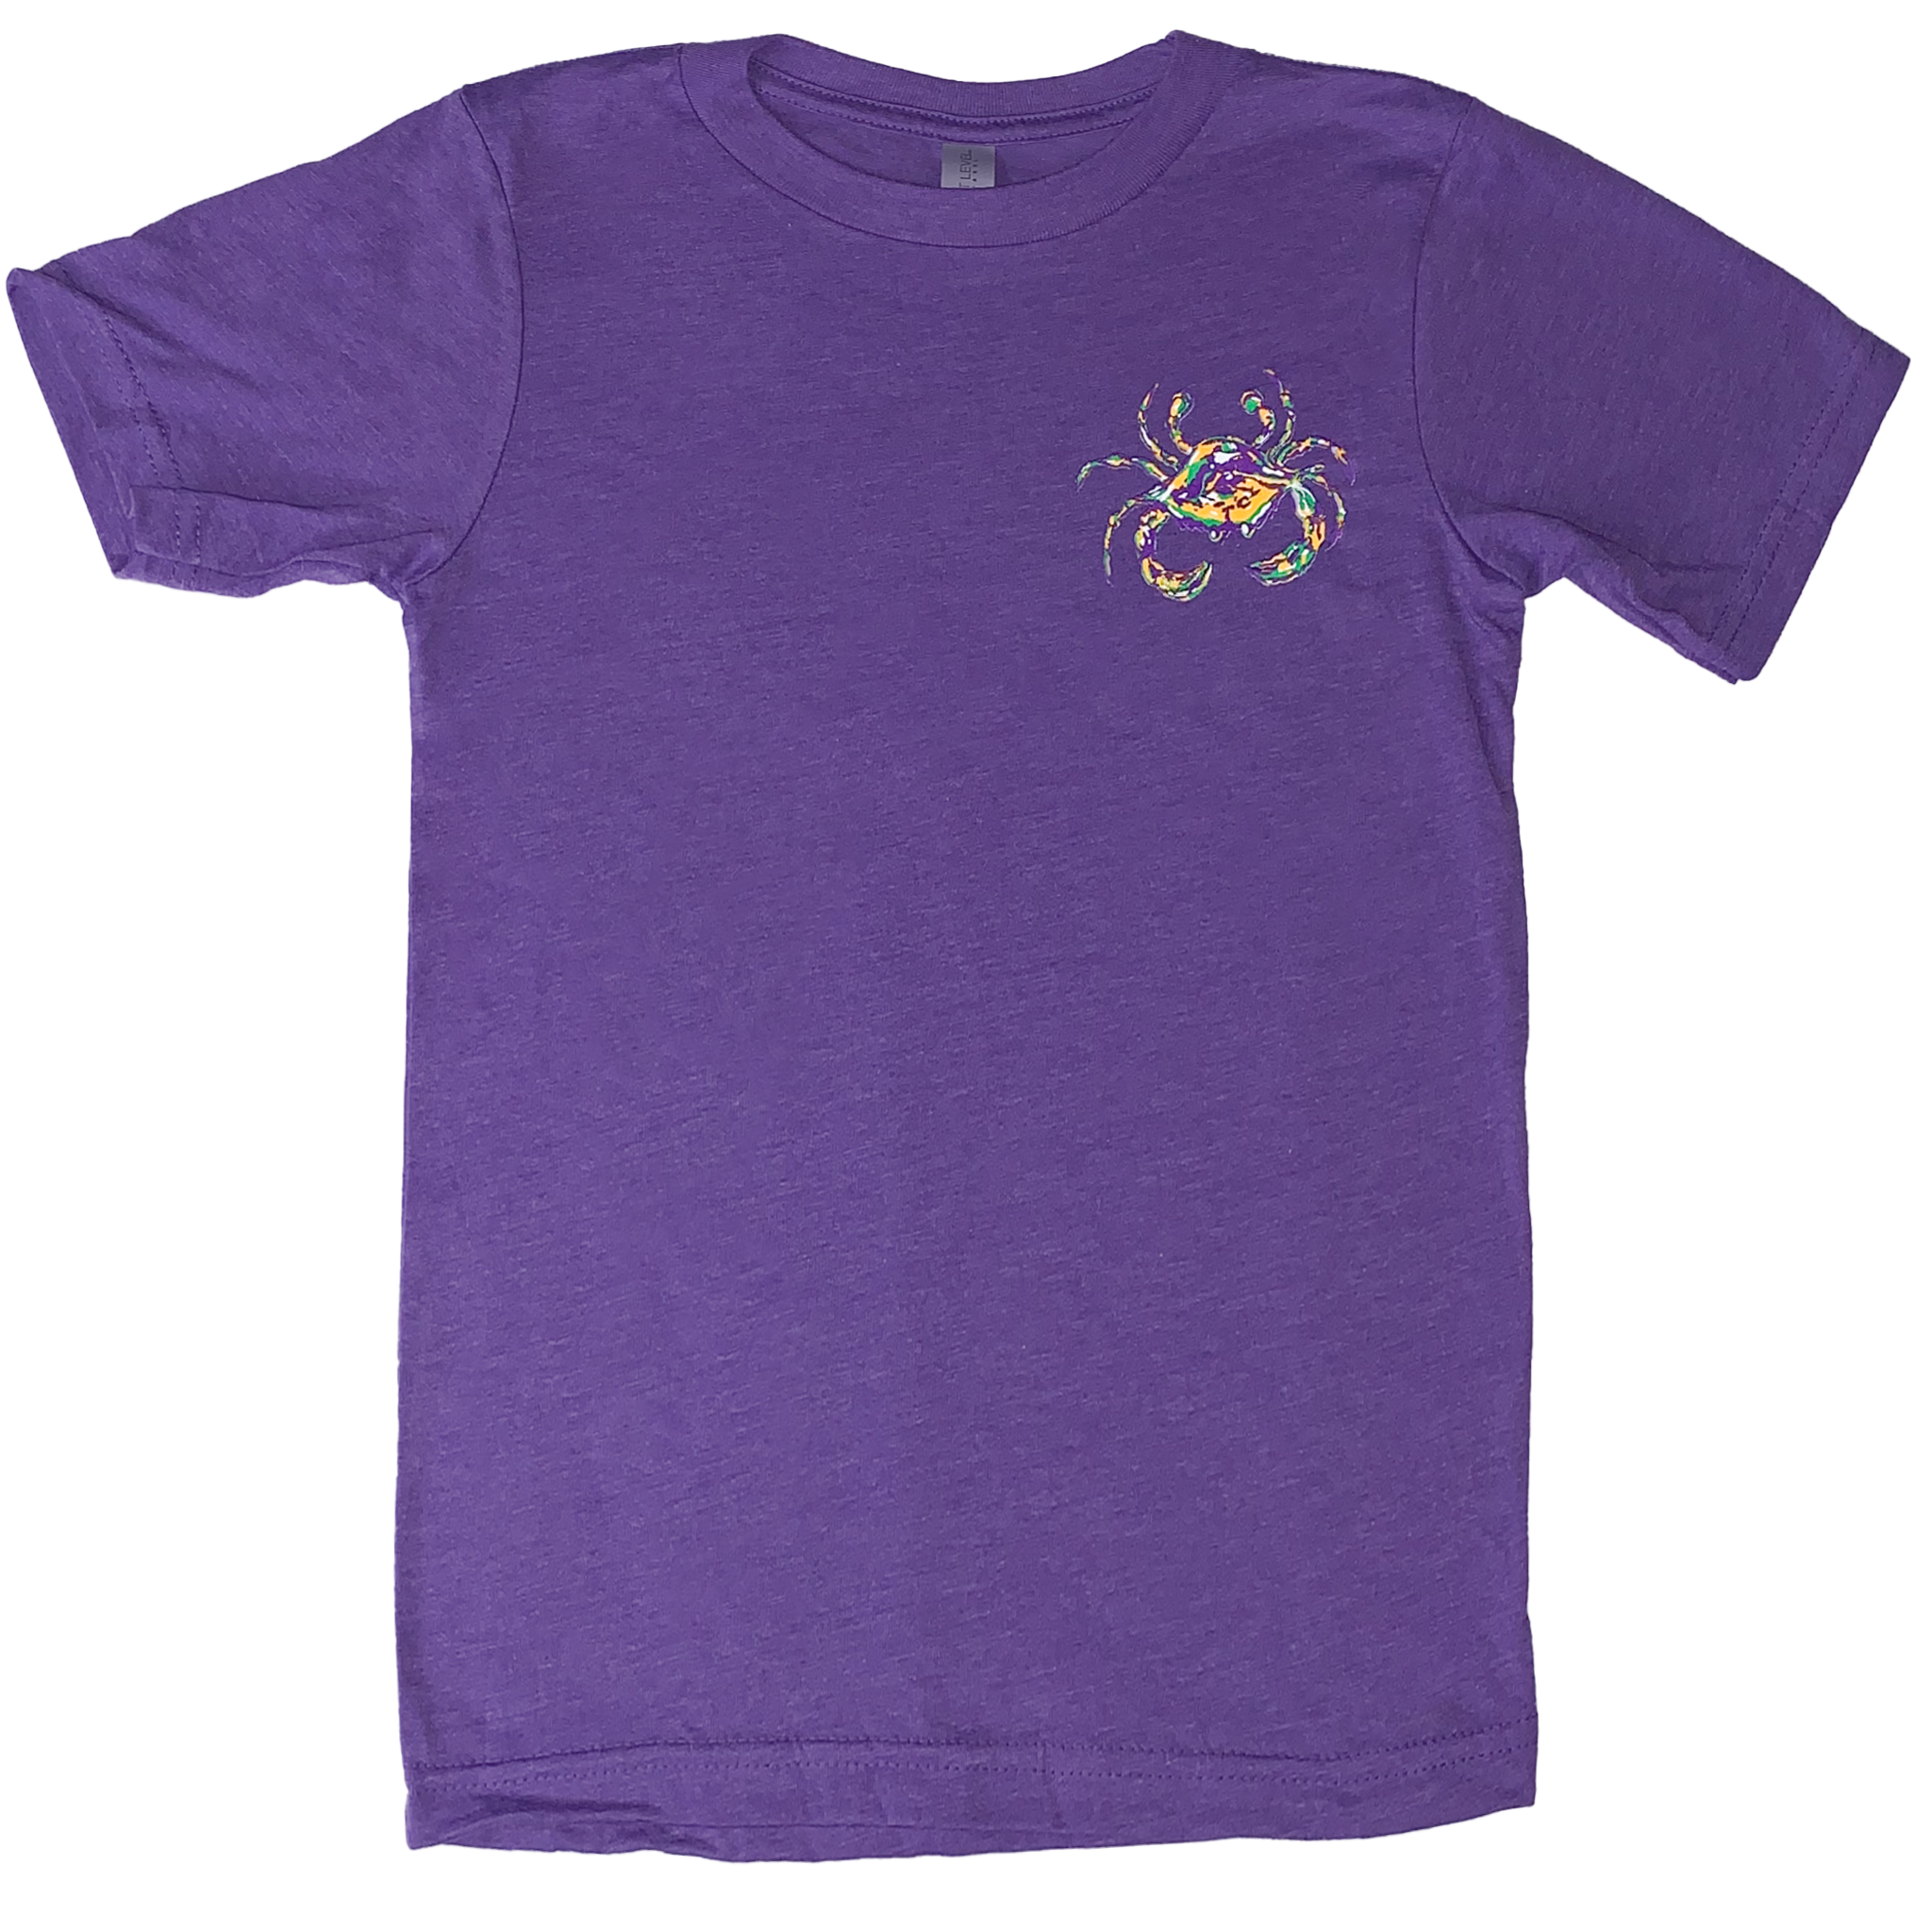 Adult purple tri-blend shirt with a Mardi Gras Crab on the front.